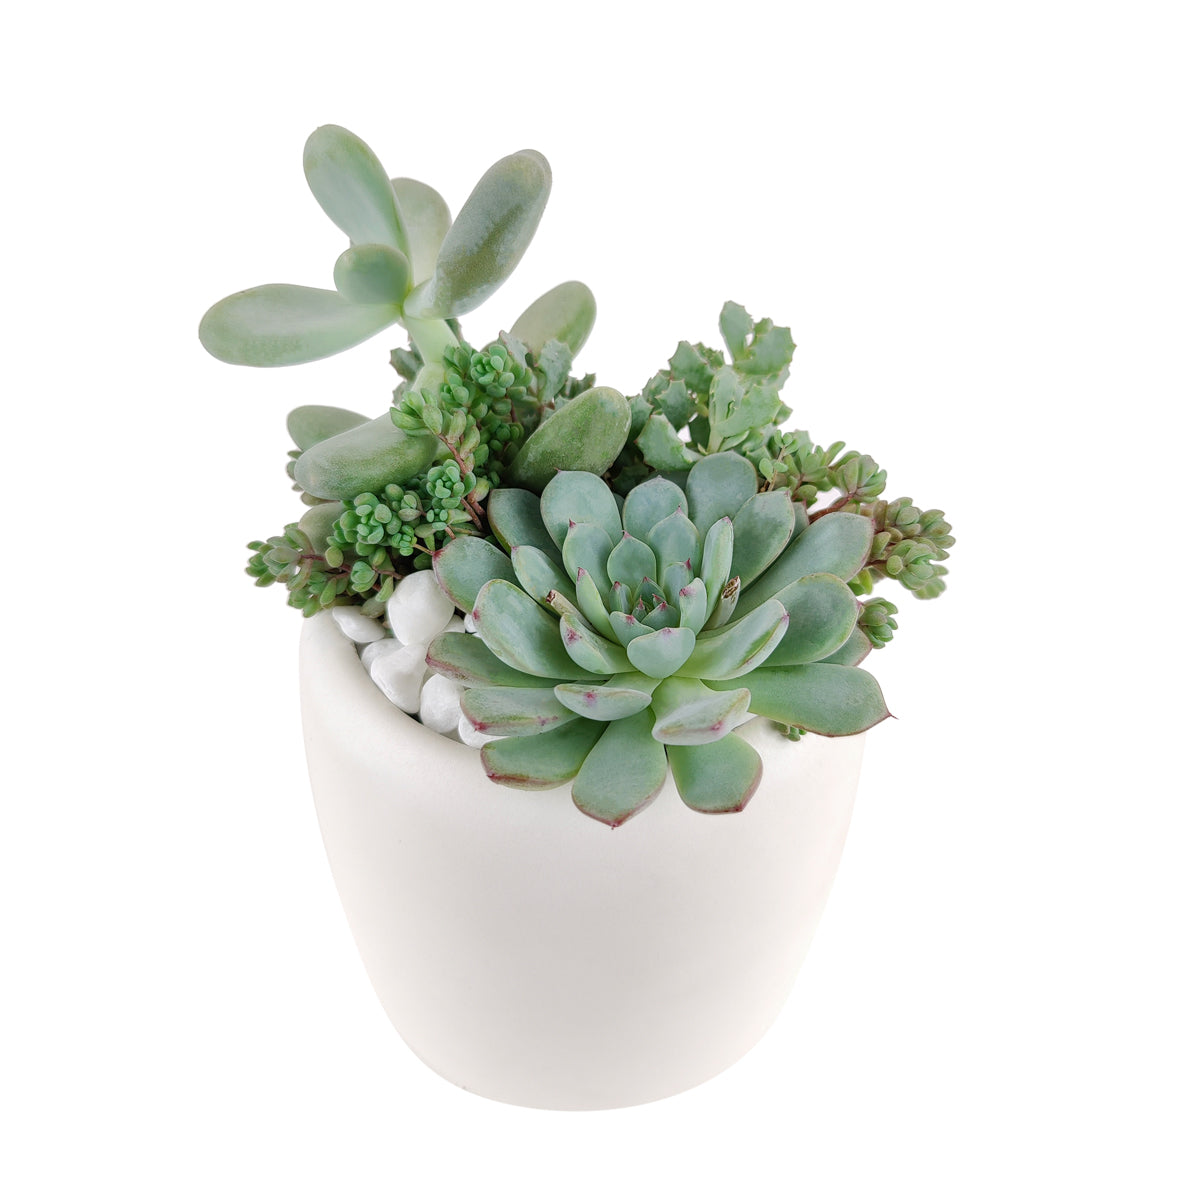 succulent themed gifts, succulent pot arrangement, succulent christmas gifts, cactus succulent arrangement, live succulent arrangement, succulent garden gifts, colorful succulent arrangement, succulent gifts online,  succulent flower arrangement delivery, Gifts for Dad, Father's Day Gifts Delivery 2022, Plant Gifts for Men, Happy Father's Day Gift